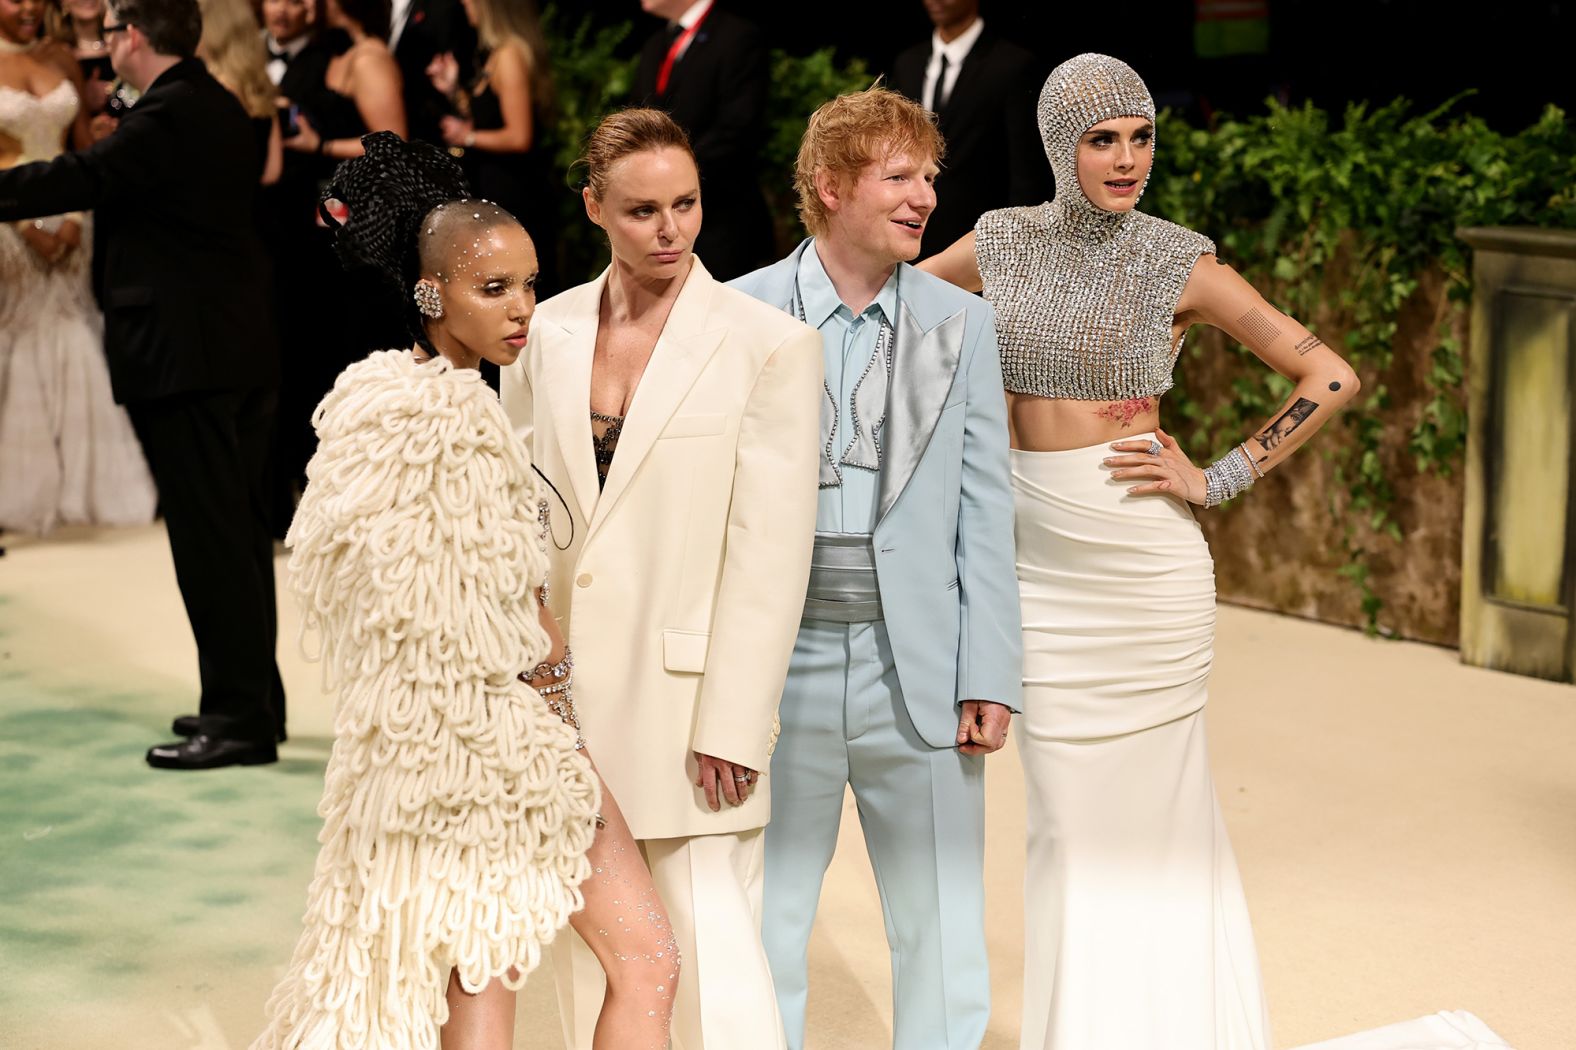 From left: FKA Twigs, Stella McCartney, Ed Sheeran, and Cara Delevingne brought more sustainable practices to focus wearing Stella McCartney embellished or accessorized with lab grown diamonds from Vrai, including a 500 carat bodice and hood for Delevingne.<br />